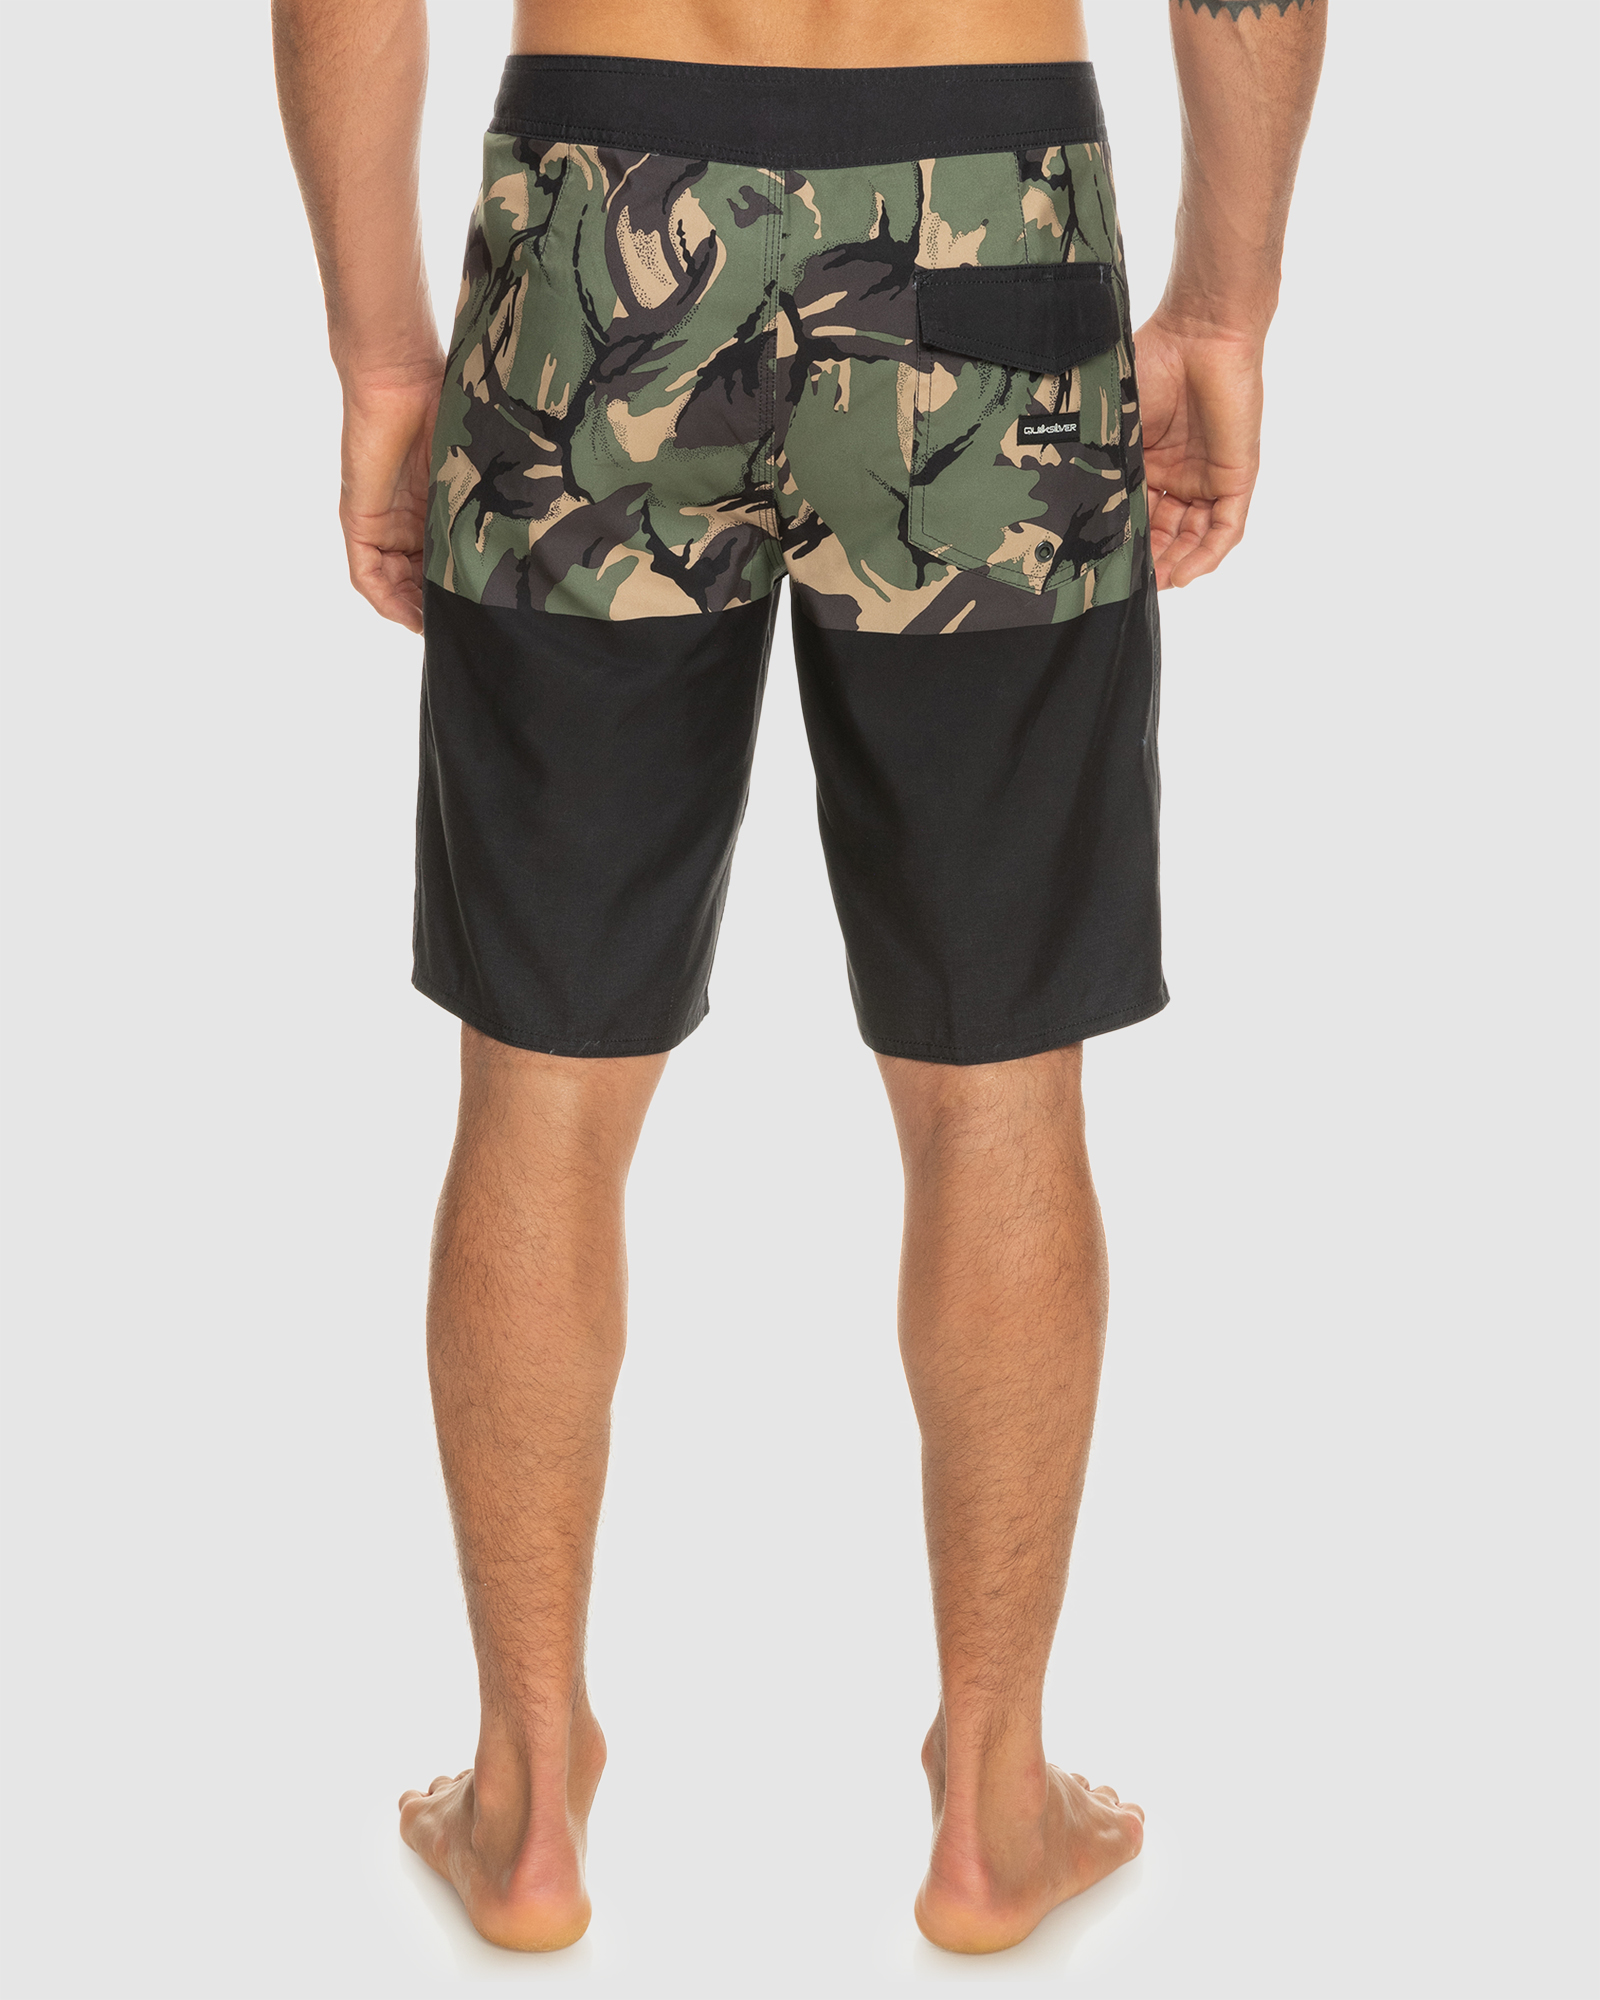 Quiksilver Mens Everyday Division 20 Inch Boardshorts - Black | SurfStitch